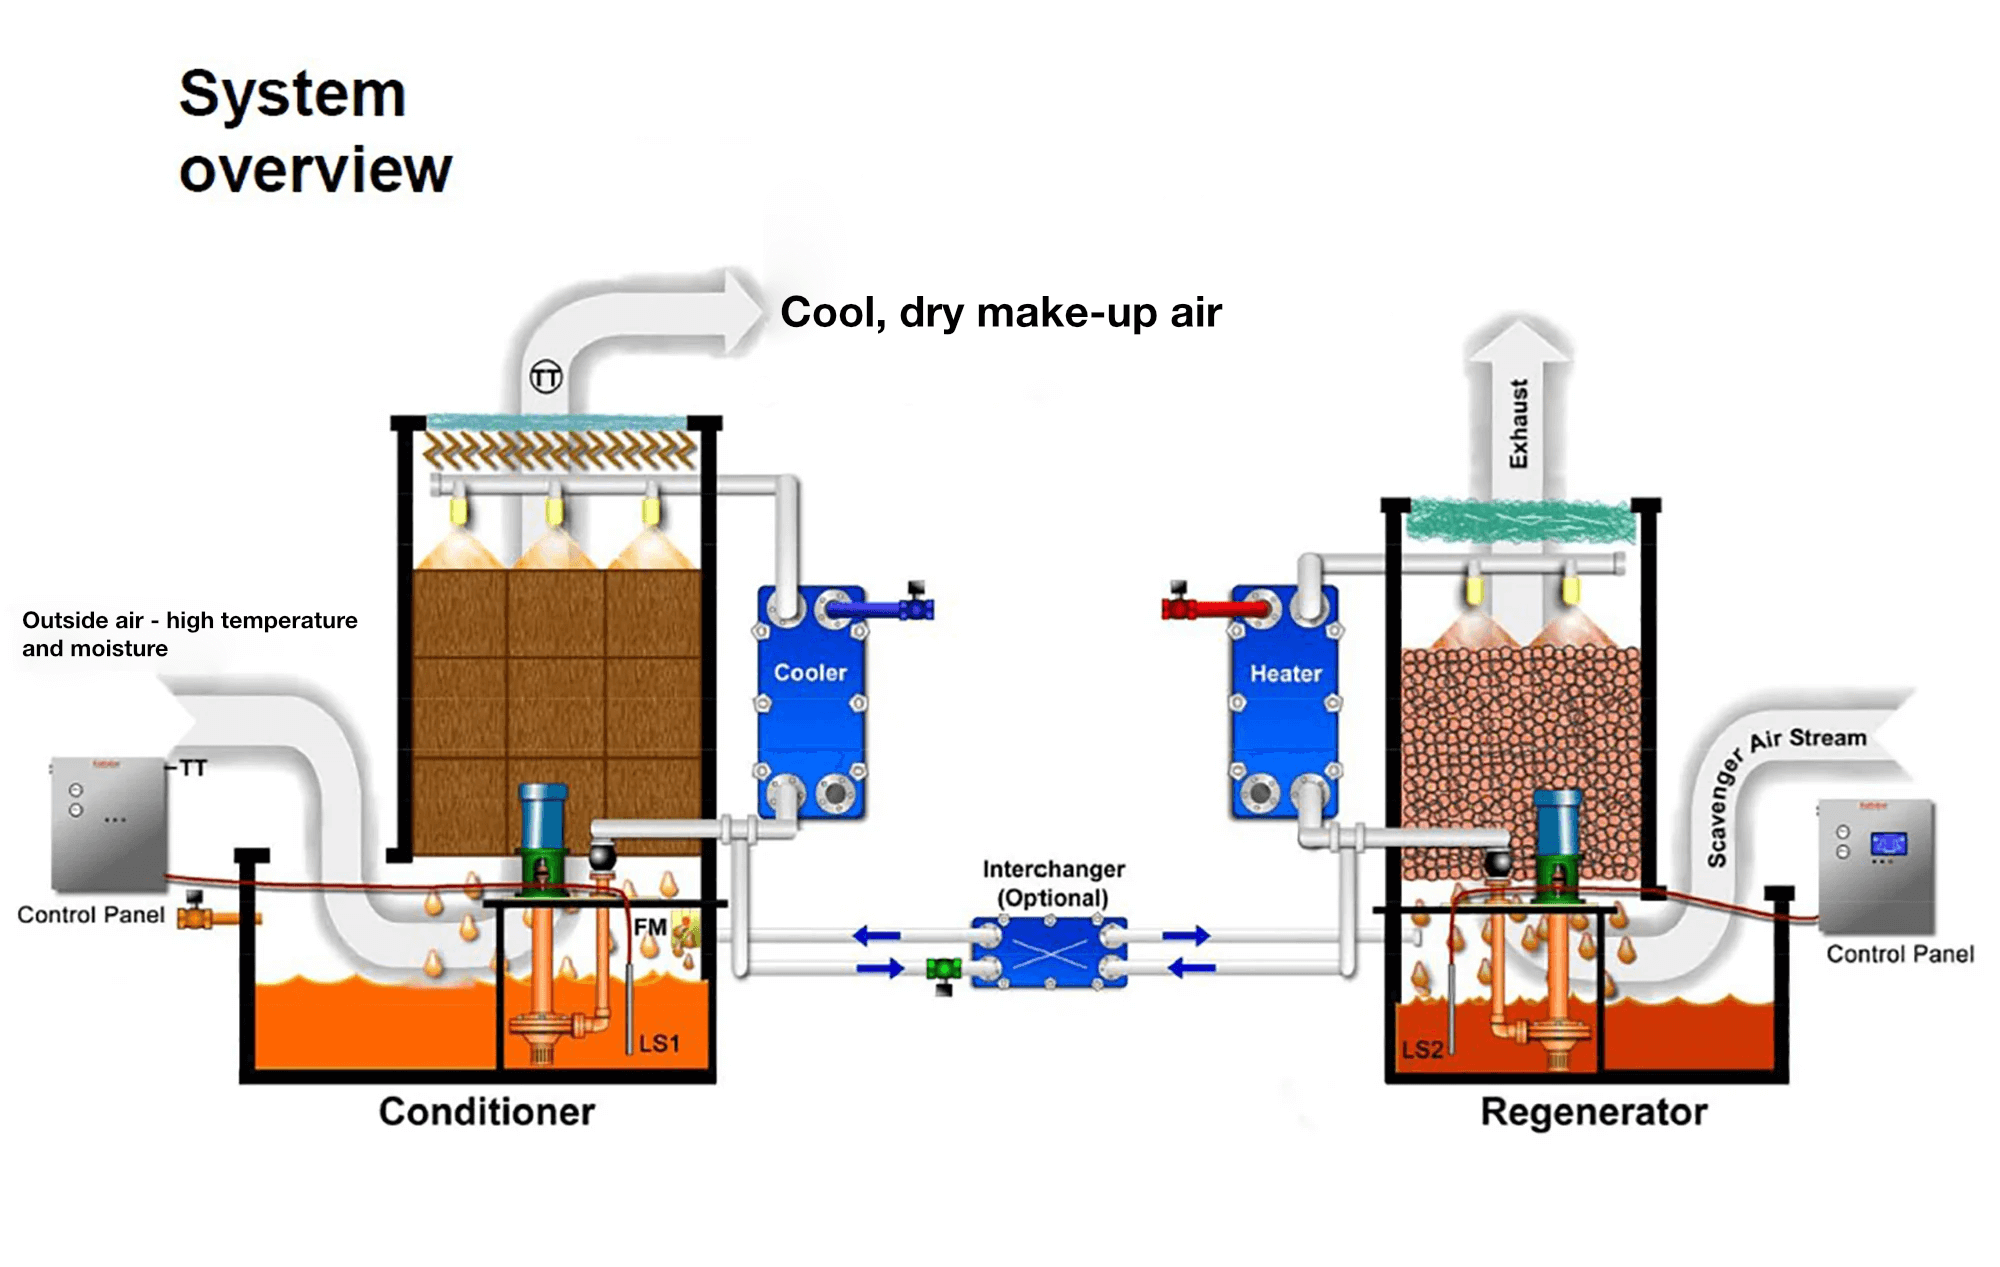 Kathabar OR system - system-overview-image - No UV.png